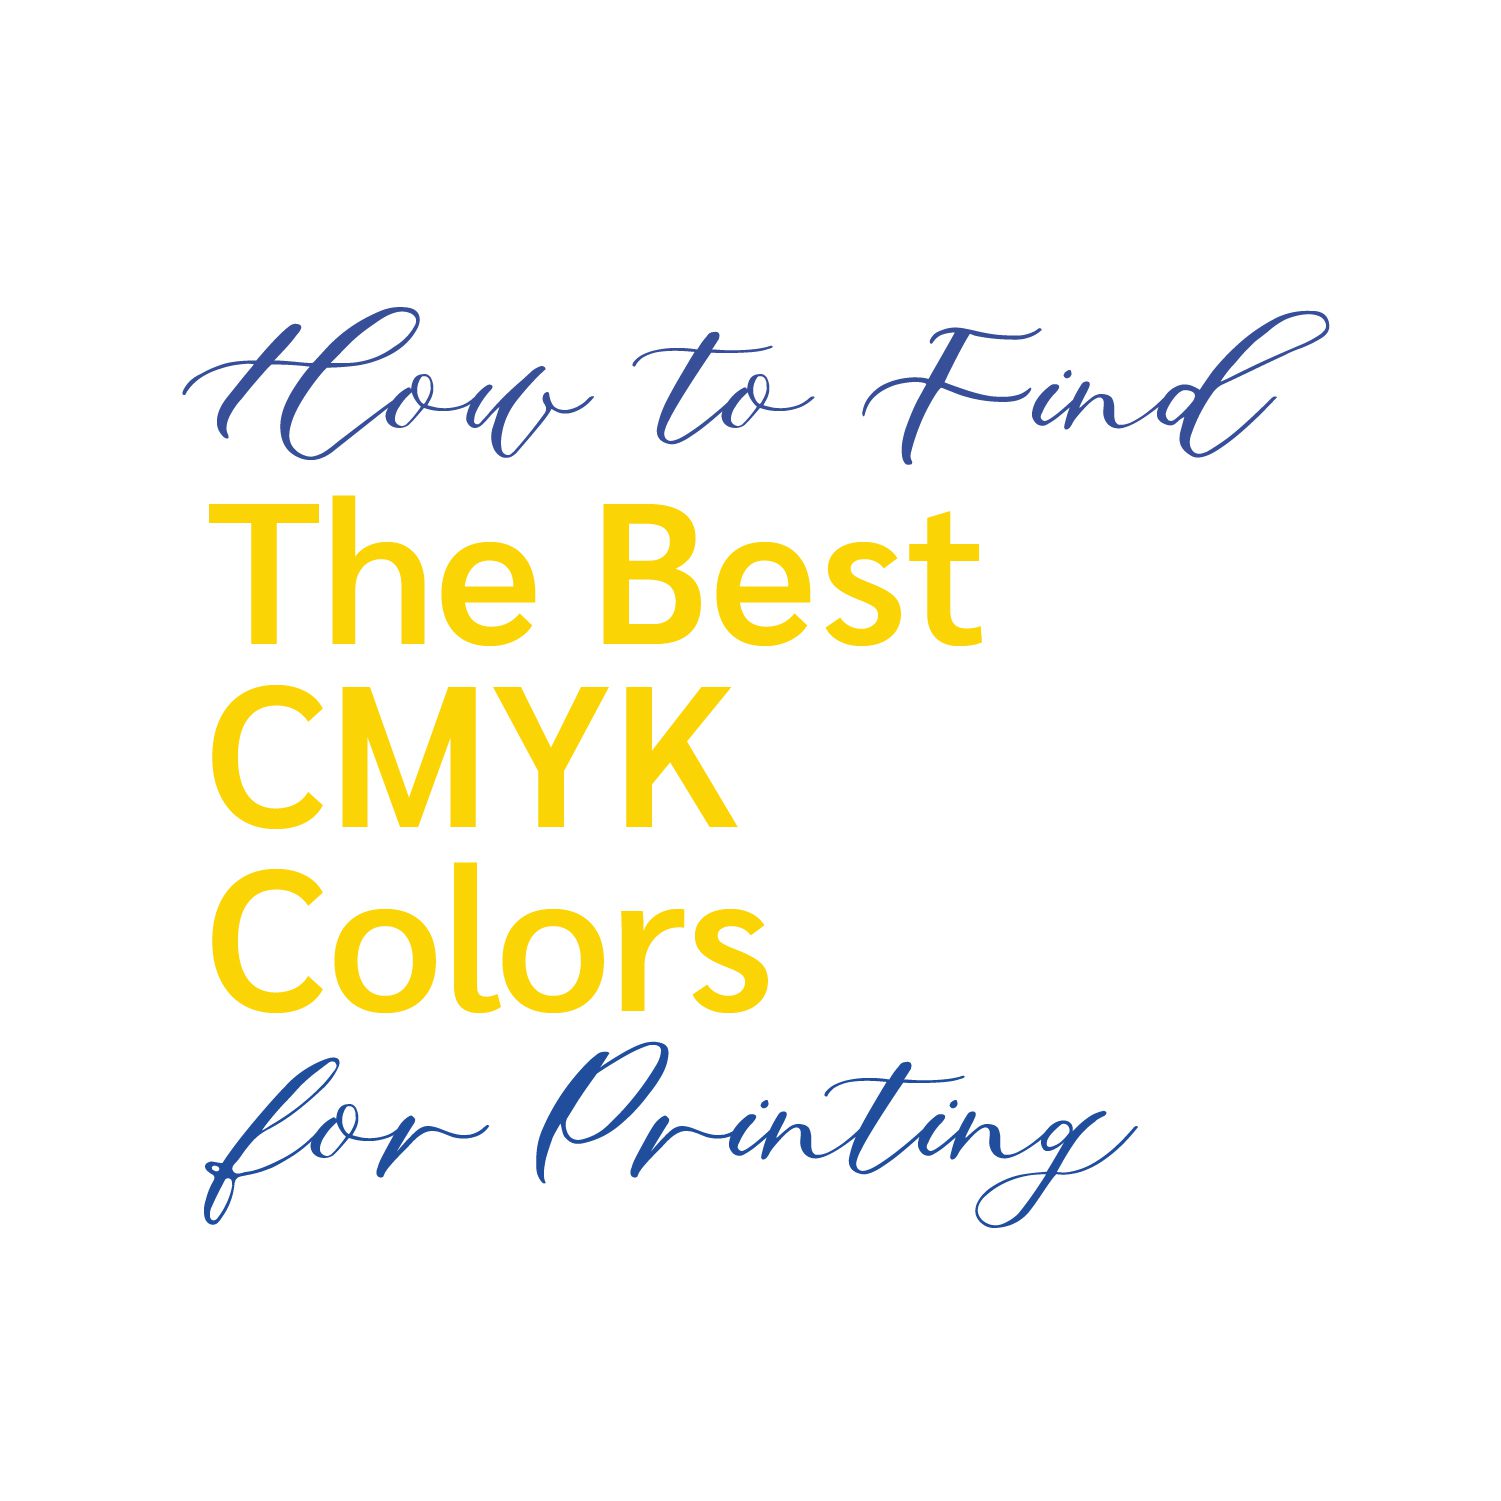 Best CMYK Colors for Printing